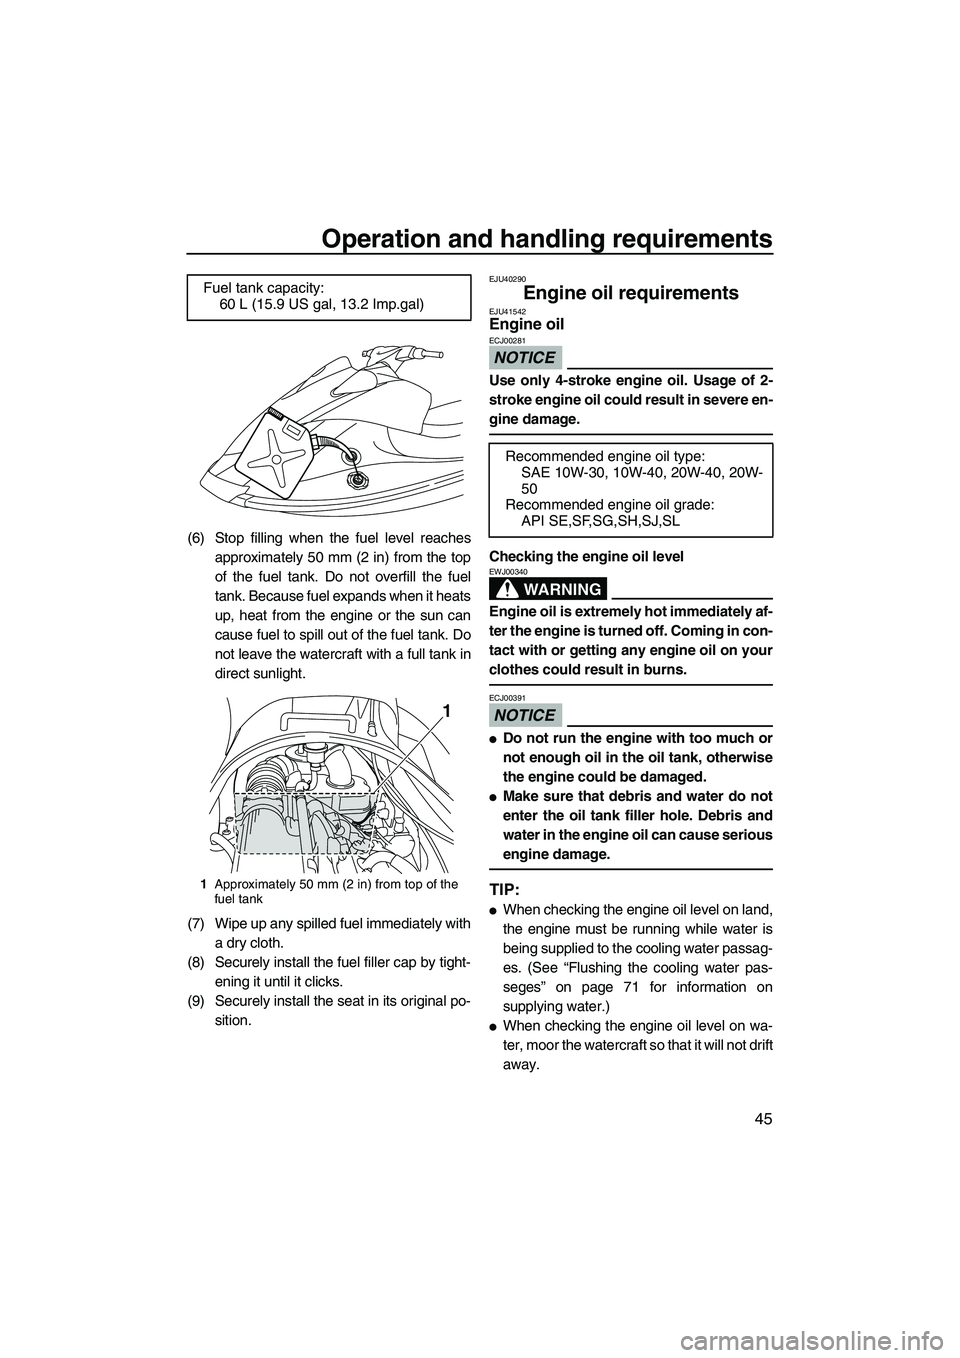 YAMAHA VX CRUISER 2012  Owners Manual Operation and handling requirements
45
(6) Stop filling when the fuel level reaches
approximately 50 mm (2 in) from the top
of the fuel tank. Do not overfill the fuel
tank. Because fuel expands when i